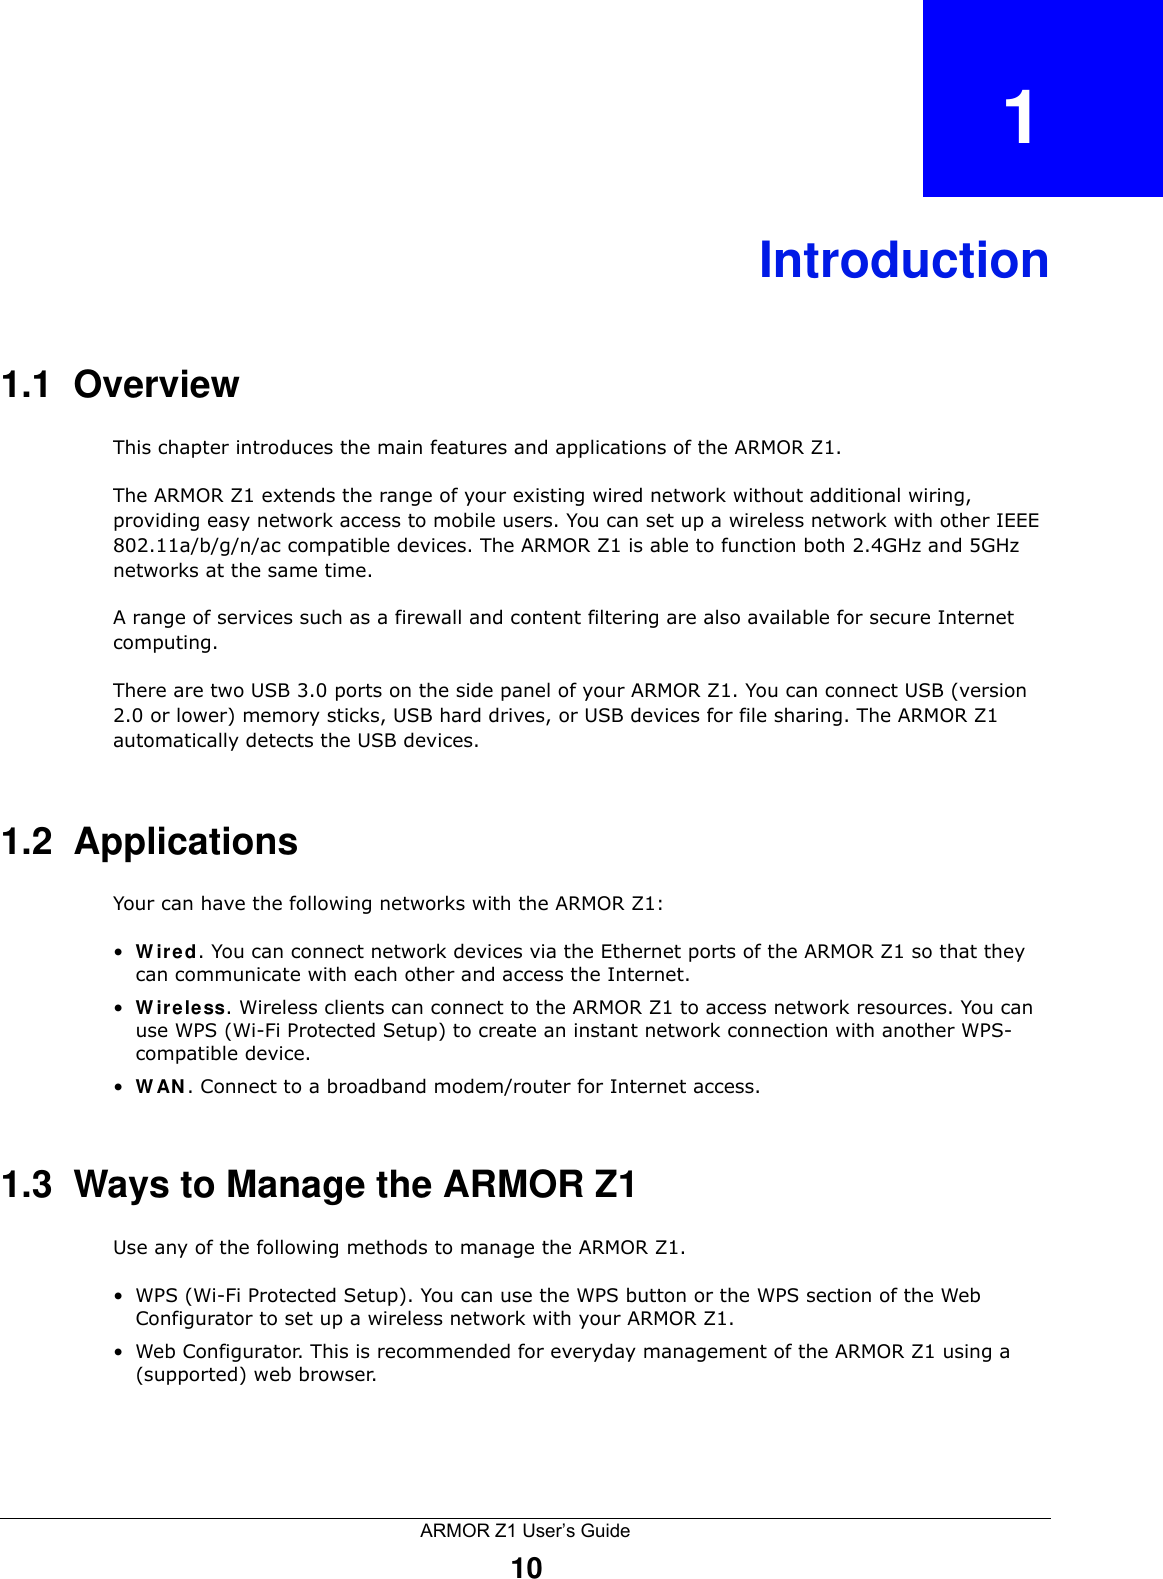 ARMOR Z1 User’s Guide10CHAPTER   1Introduction1.1  OverviewThis chapter introduces the main features and applications of the ARMOR Z1.The ARMOR Z1 extends the range of your existing wired network without additional wiring, providing easy network access to mobile users. You can set up a wireless network with other IEEE 802.11a/b/g/n/ac compatible devices. The ARMOR Z1 is able to function both 2.4GHz and 5GHz networks at the same time.A range of services such as a firewall and content filtering are also available for secure Internet computing. There are two USB 3.0 ports on the side panel of your ARMOR Z1. You can connect USB (version 2.0 or lower) memory sticks, USB hard drives, or USB devices for file sharing. The ARMOR Z1 automatically detects the USB devices. 1.2  ApplicationsYour can have the following networks with the ARMOR Z1:•Wired. You can connect network devices via the Ethernet ports of the ARMOR Z1 so that they can communicate with each other and access the Internet.•Wireless. Wireless clients can connect to the ARMOR Z1 to access network resources. You can use WPS (Wi-Fi Protected Setup) to create an instant network connection with another WPS-compatible device.•WAN. Connect to a broadband modem/router for Internet access.1.3  Ways to Manage the ARMOR Z1Use any of the following methods to manage the ARMOR Z1.• WPS (Wi-Fi Protected Setup). You can use the WPS button or the WPS section of the Web Configurator to set up a wireless network with your ARMOR Z1.• Web Configurator. This is recommended for everyday management of the ARMOR Z1 using a (supported) web browser.